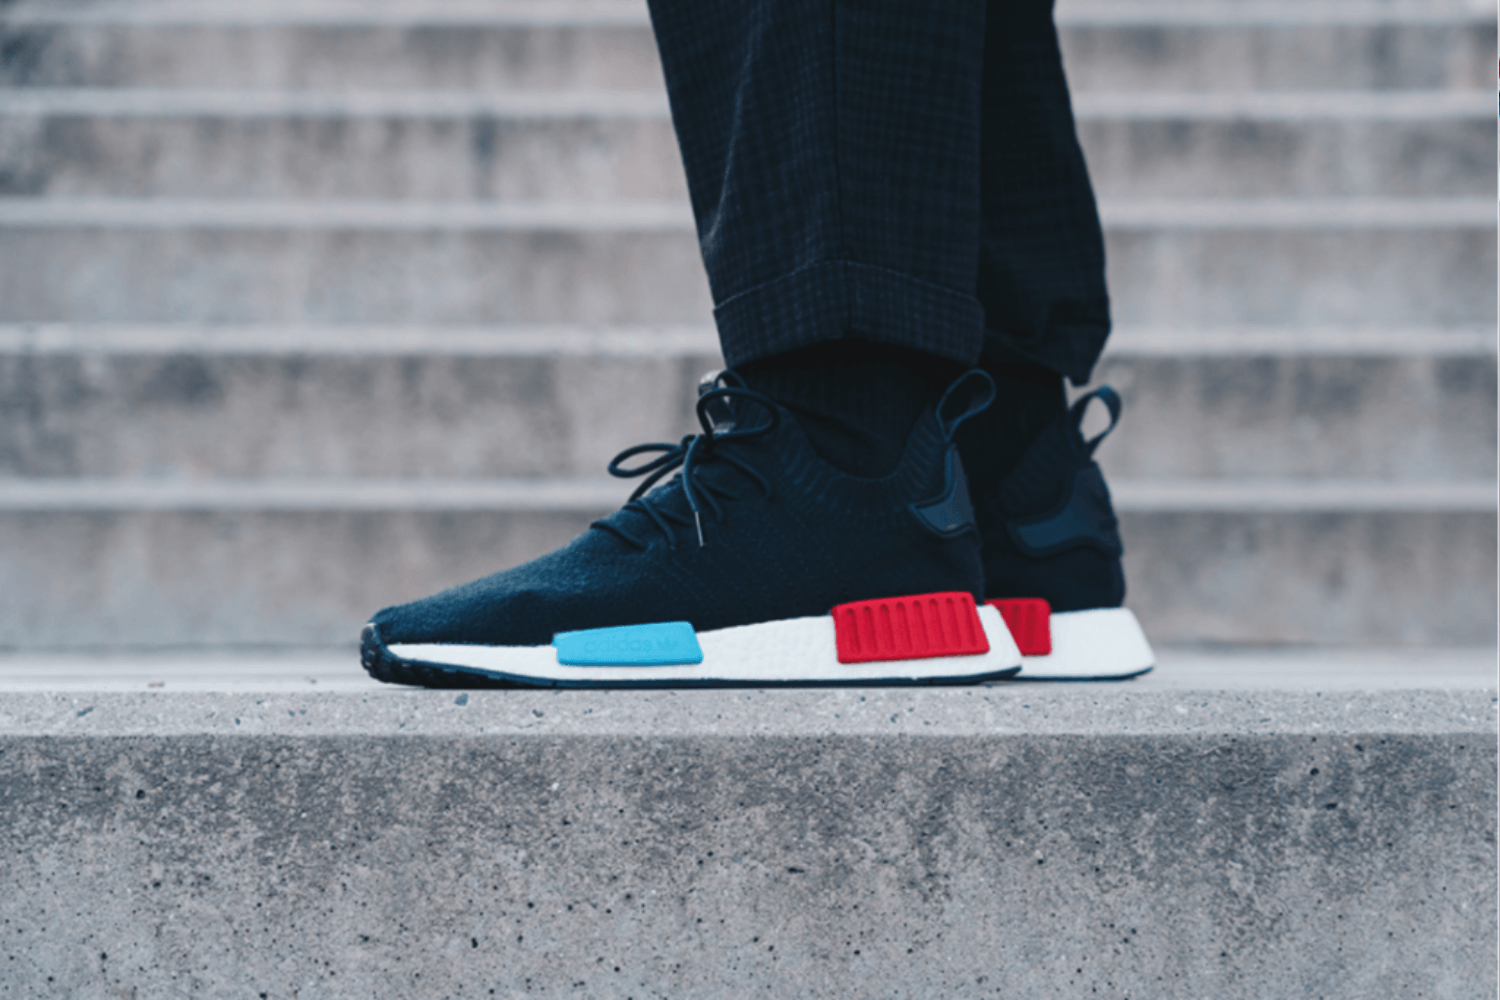 The adidas NMD R1 OG colorways are here again